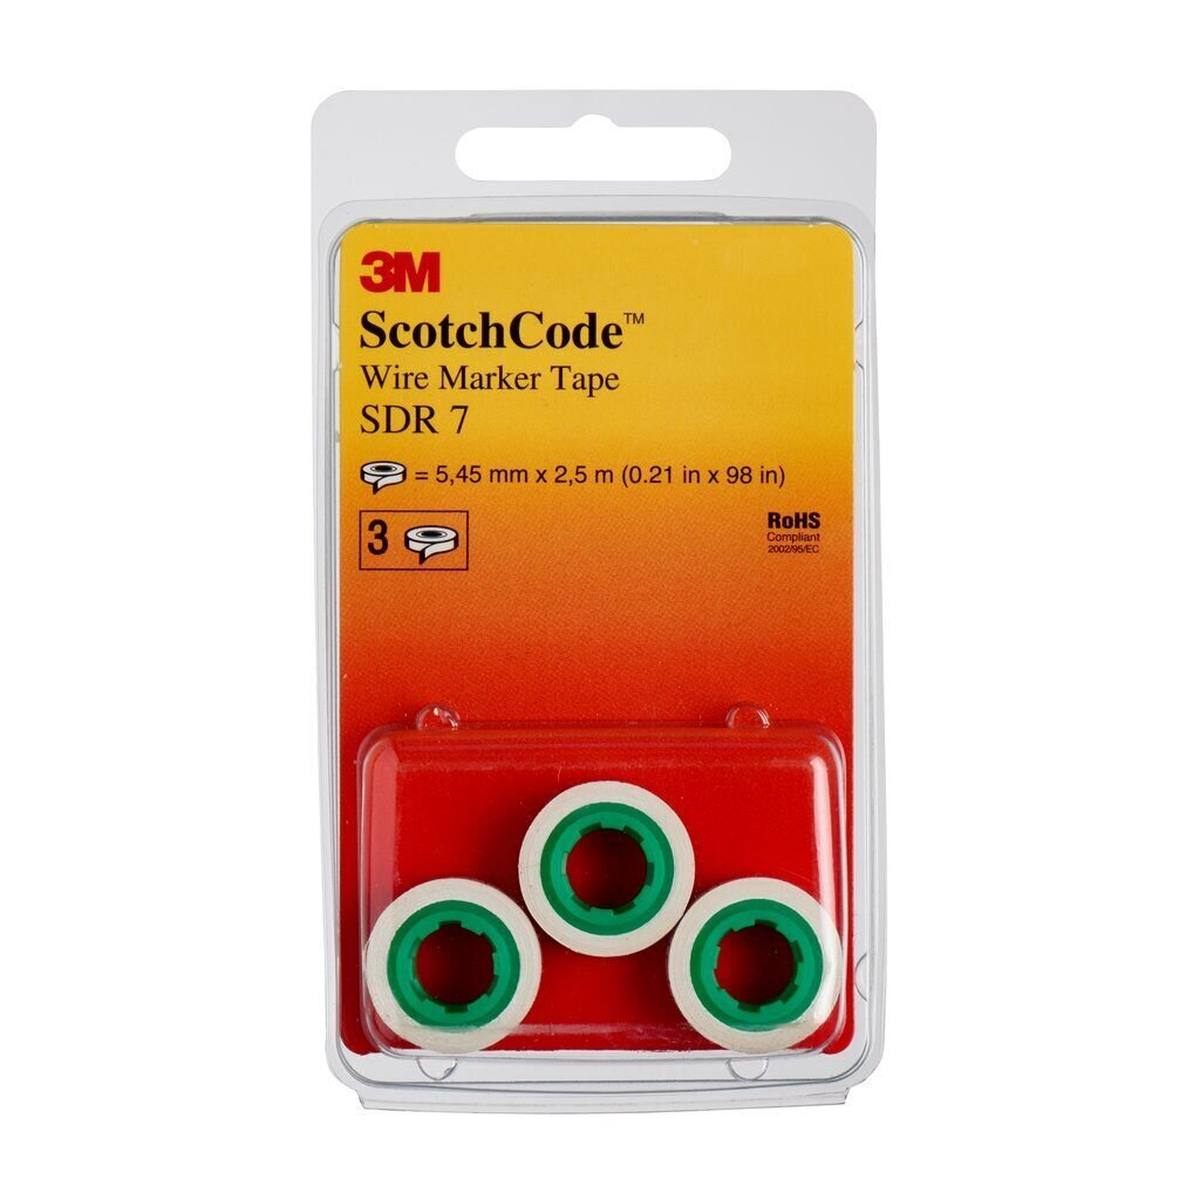 3M ScotchCode SDR-7 cable marker refill rolls, number 7, pack of 3